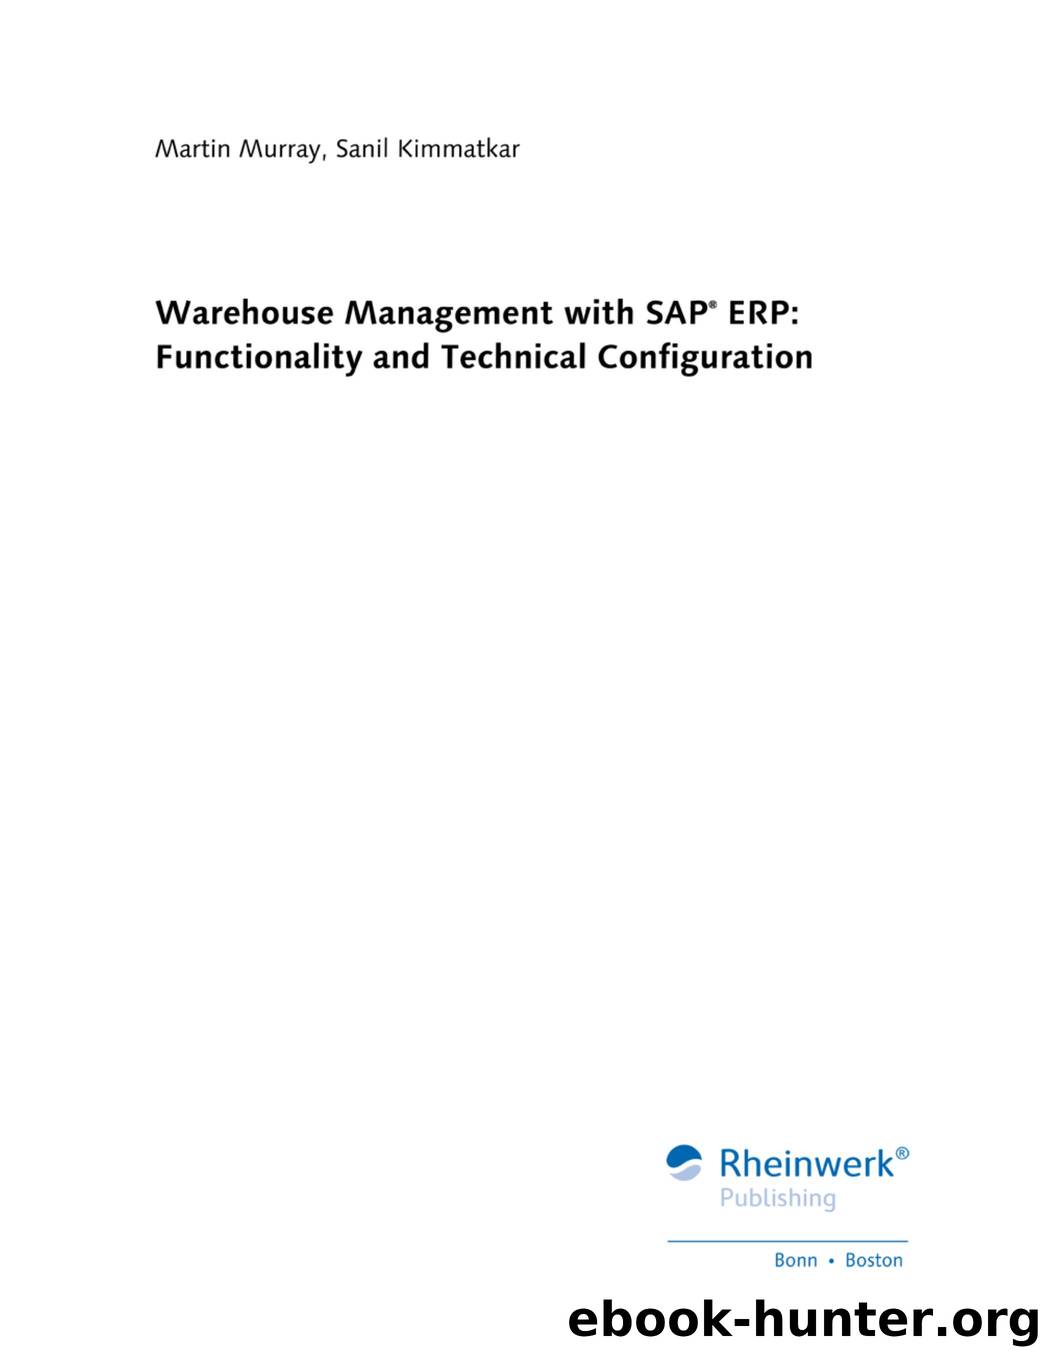 Warehouse Management with SAP ERP by Functionality & Technical Configuration